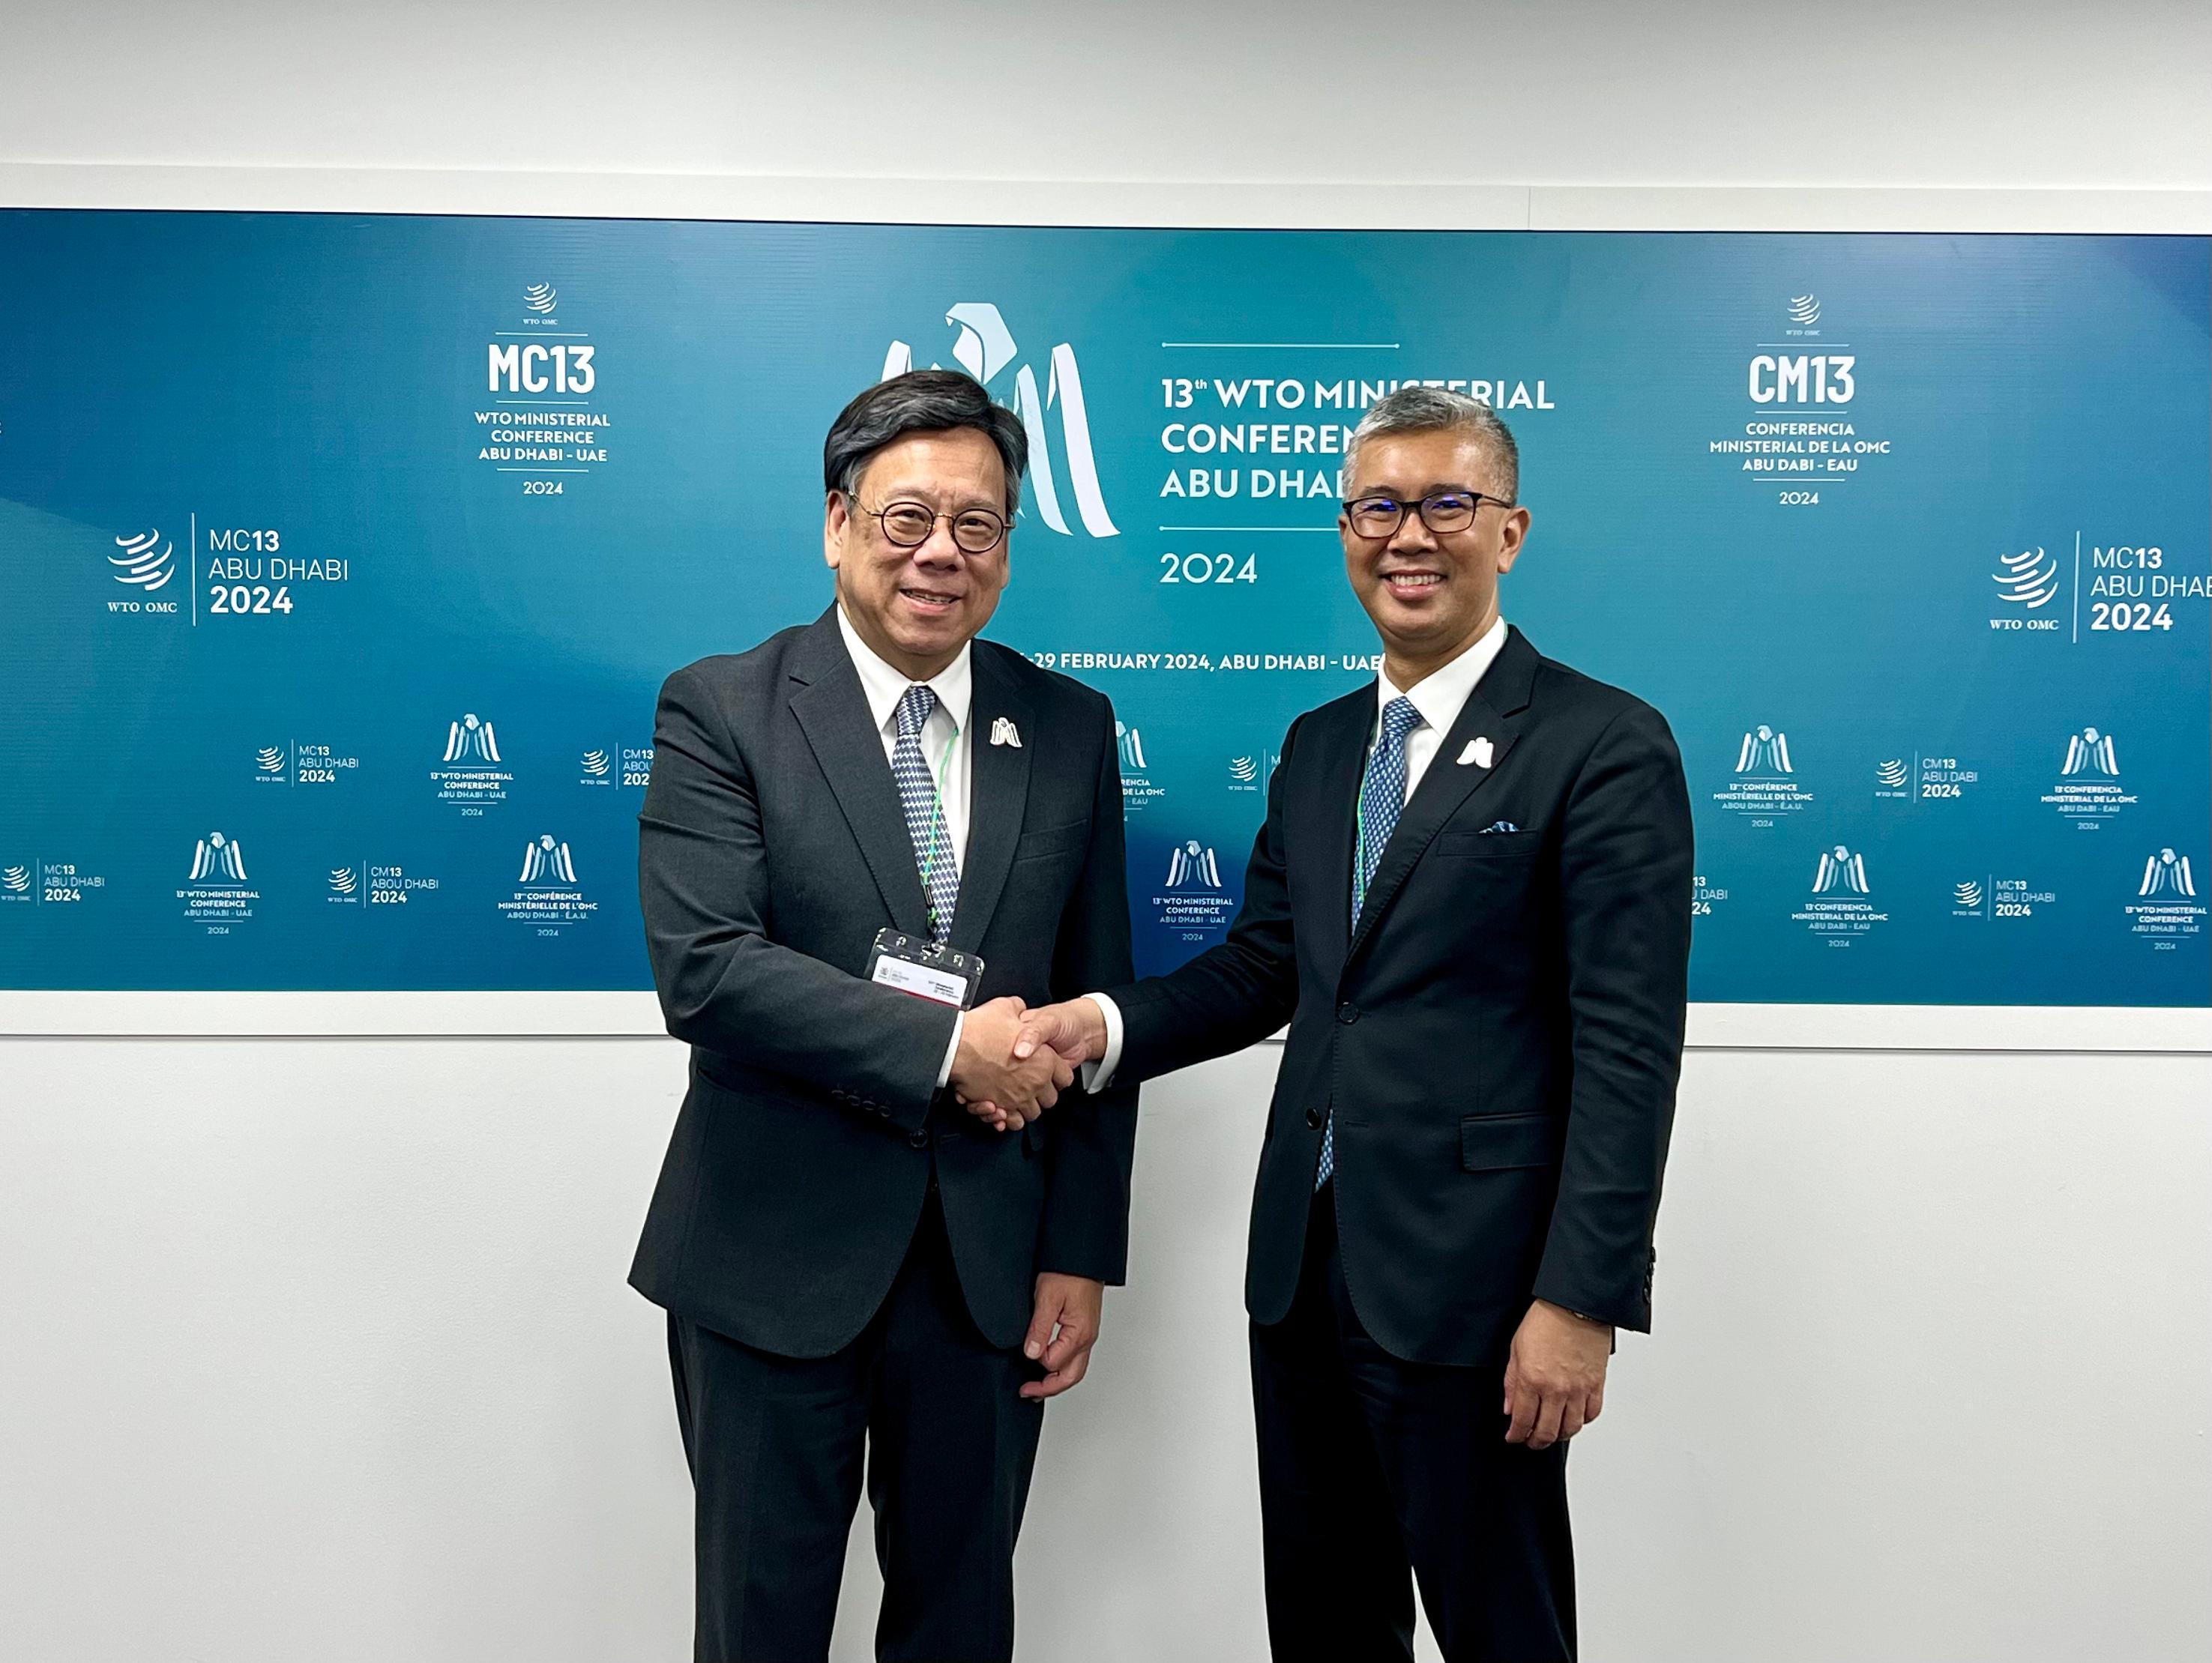 The Secretary for Commerce and Economic Development, Mr Algernon Yau (left), held a bilateral meeting with the Minister of Investment, Trade and Industry of Malaysia, Tengku Zafrul Tengku Abdul Aziz (right), on the sidelines of the 13th World Trade Organization Ministerial Conference in Abu Dhabi, the United Arab Emirates, on February 27 (Abu Dhabi time) to exchange views on various trade and economic issues.